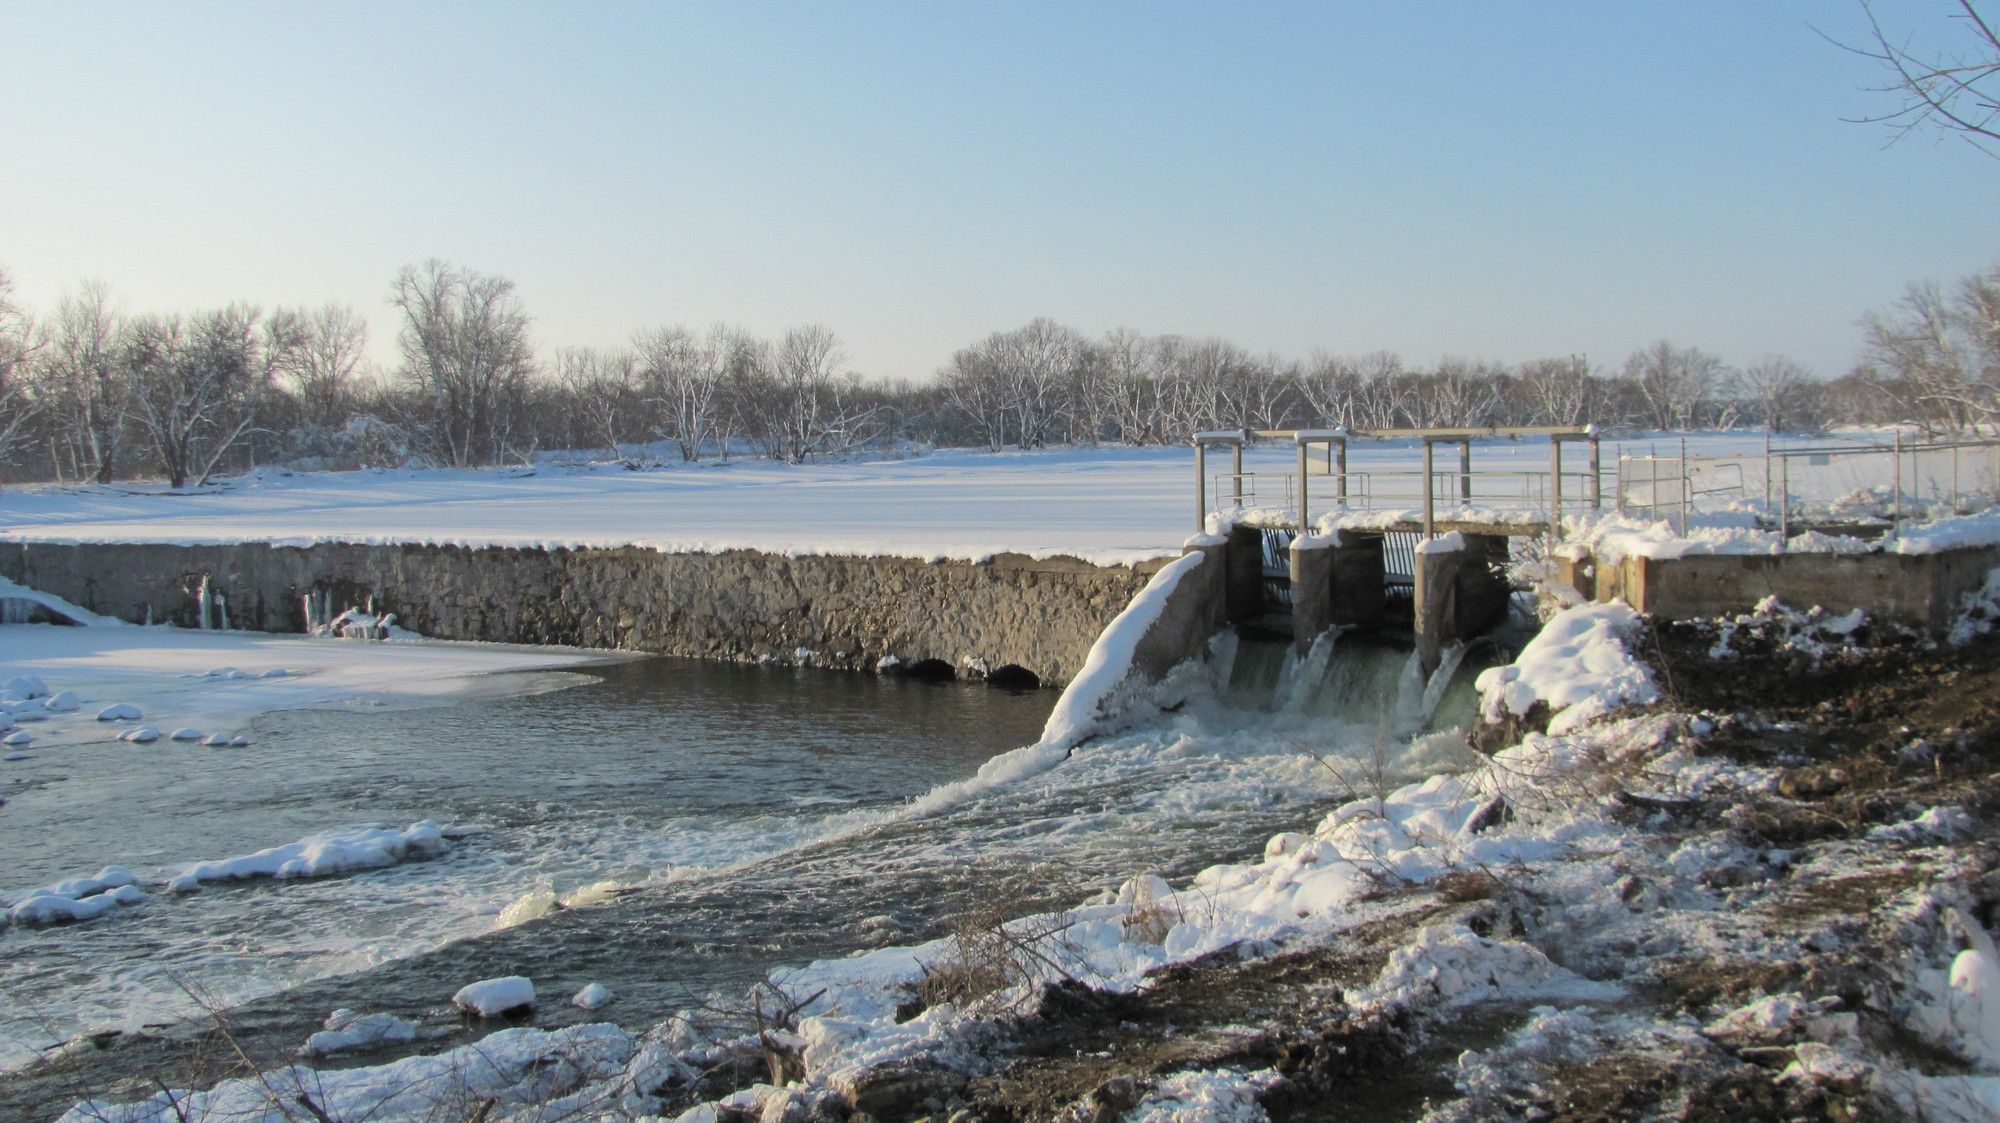 The Minnesota Falls Dam, before removal, featured a cement 14ft wall across the river, creating a resevoir behind it.